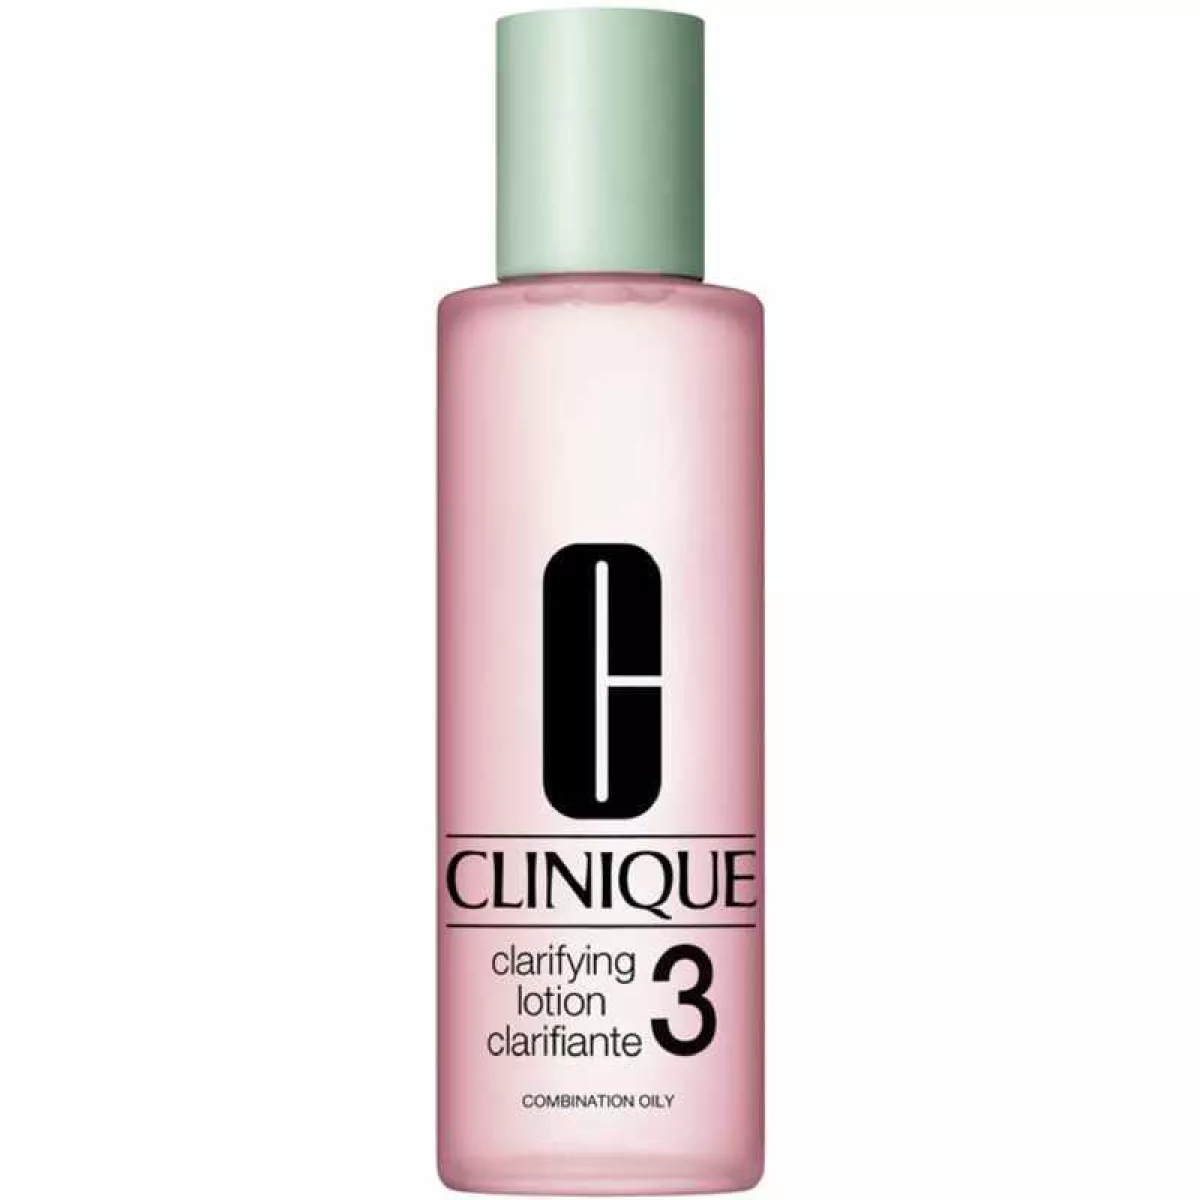 #1 - Clinique Clarifying Lotion 3 - 400 ml